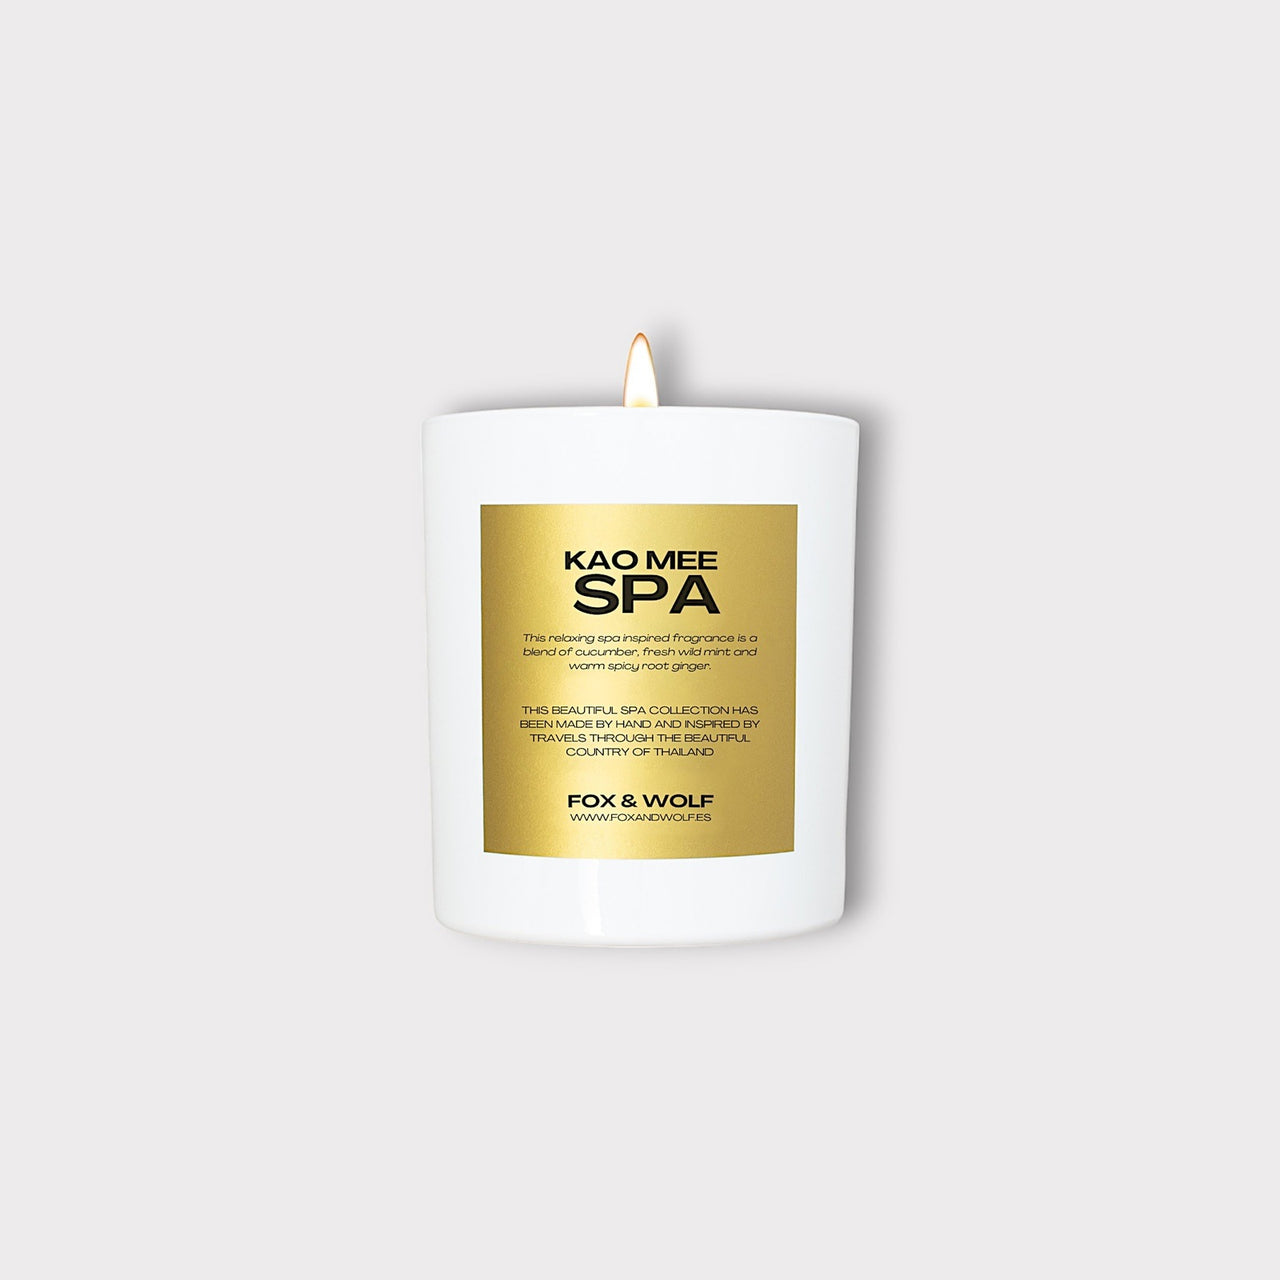 300G KAO MEE SPA SCENTED CANDLE